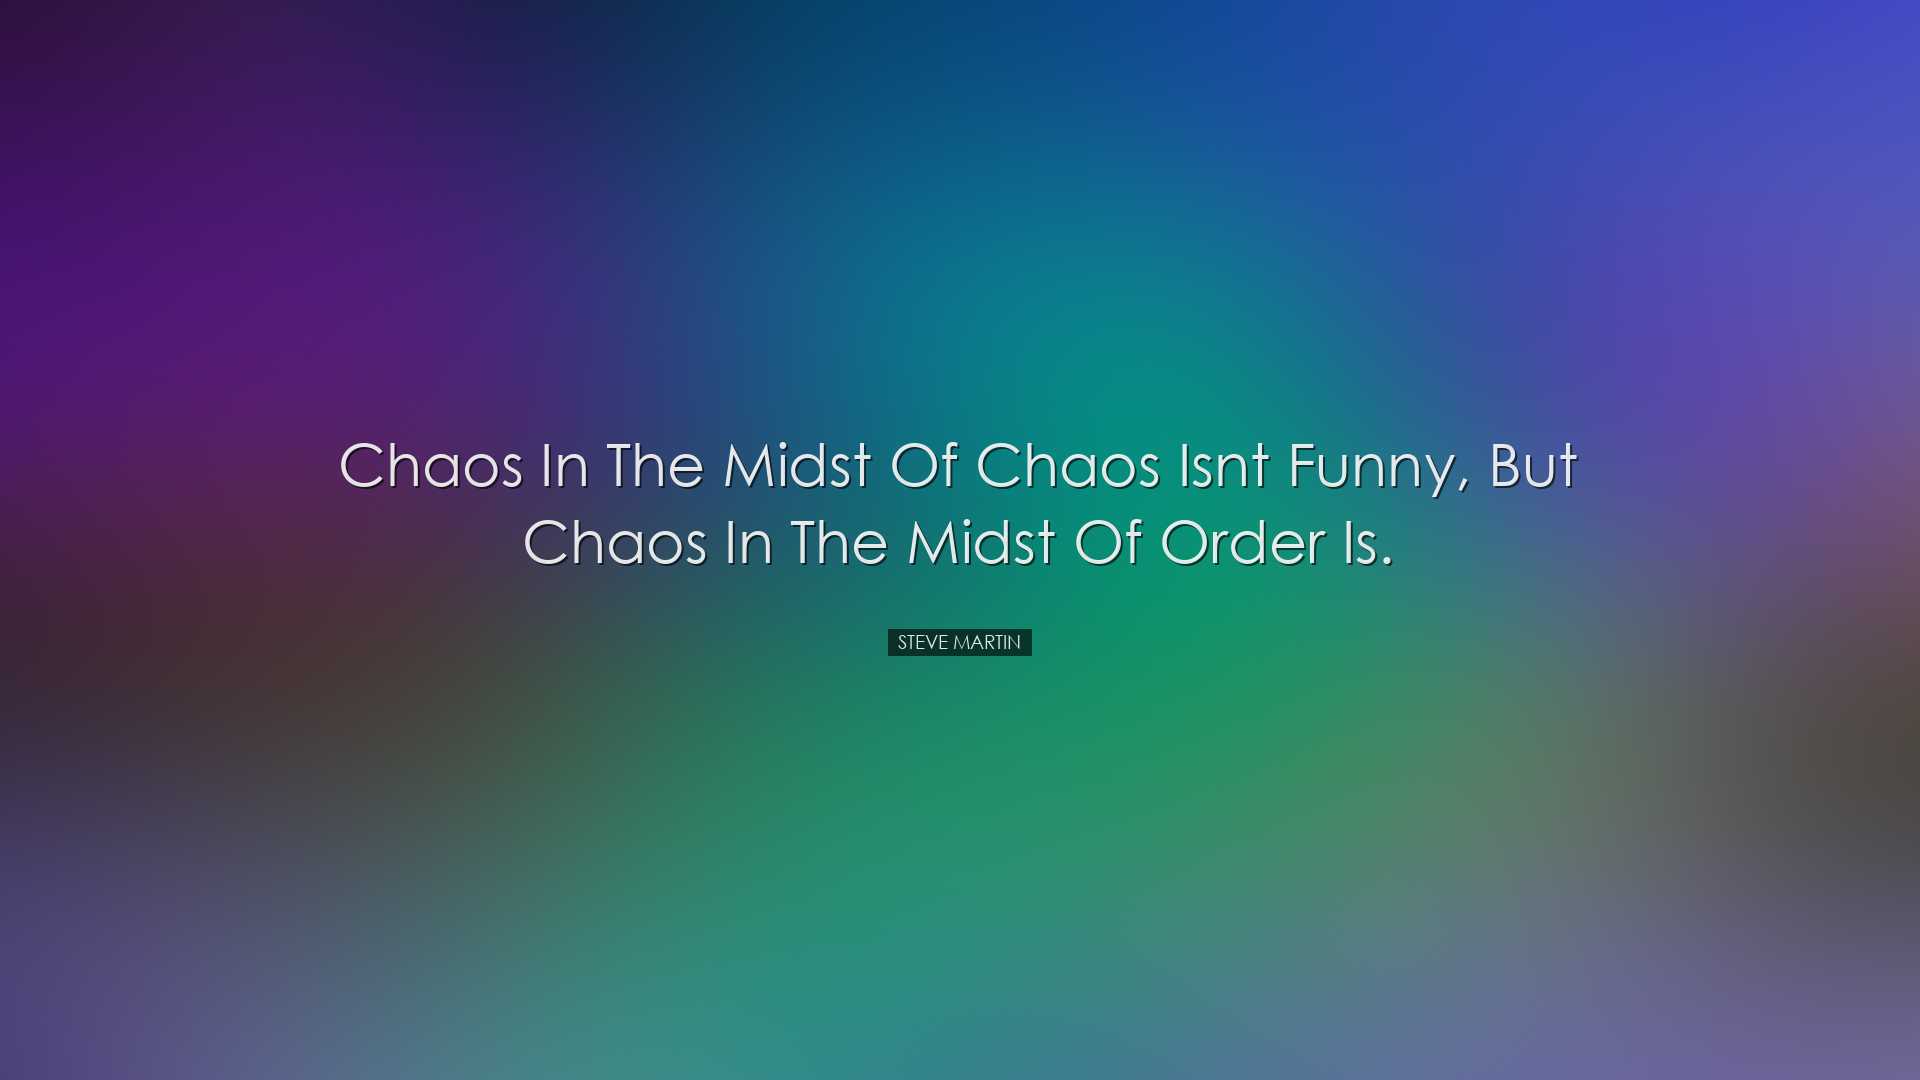 Chaos in the midst of chaos isnt funny, but chaos in the midst of